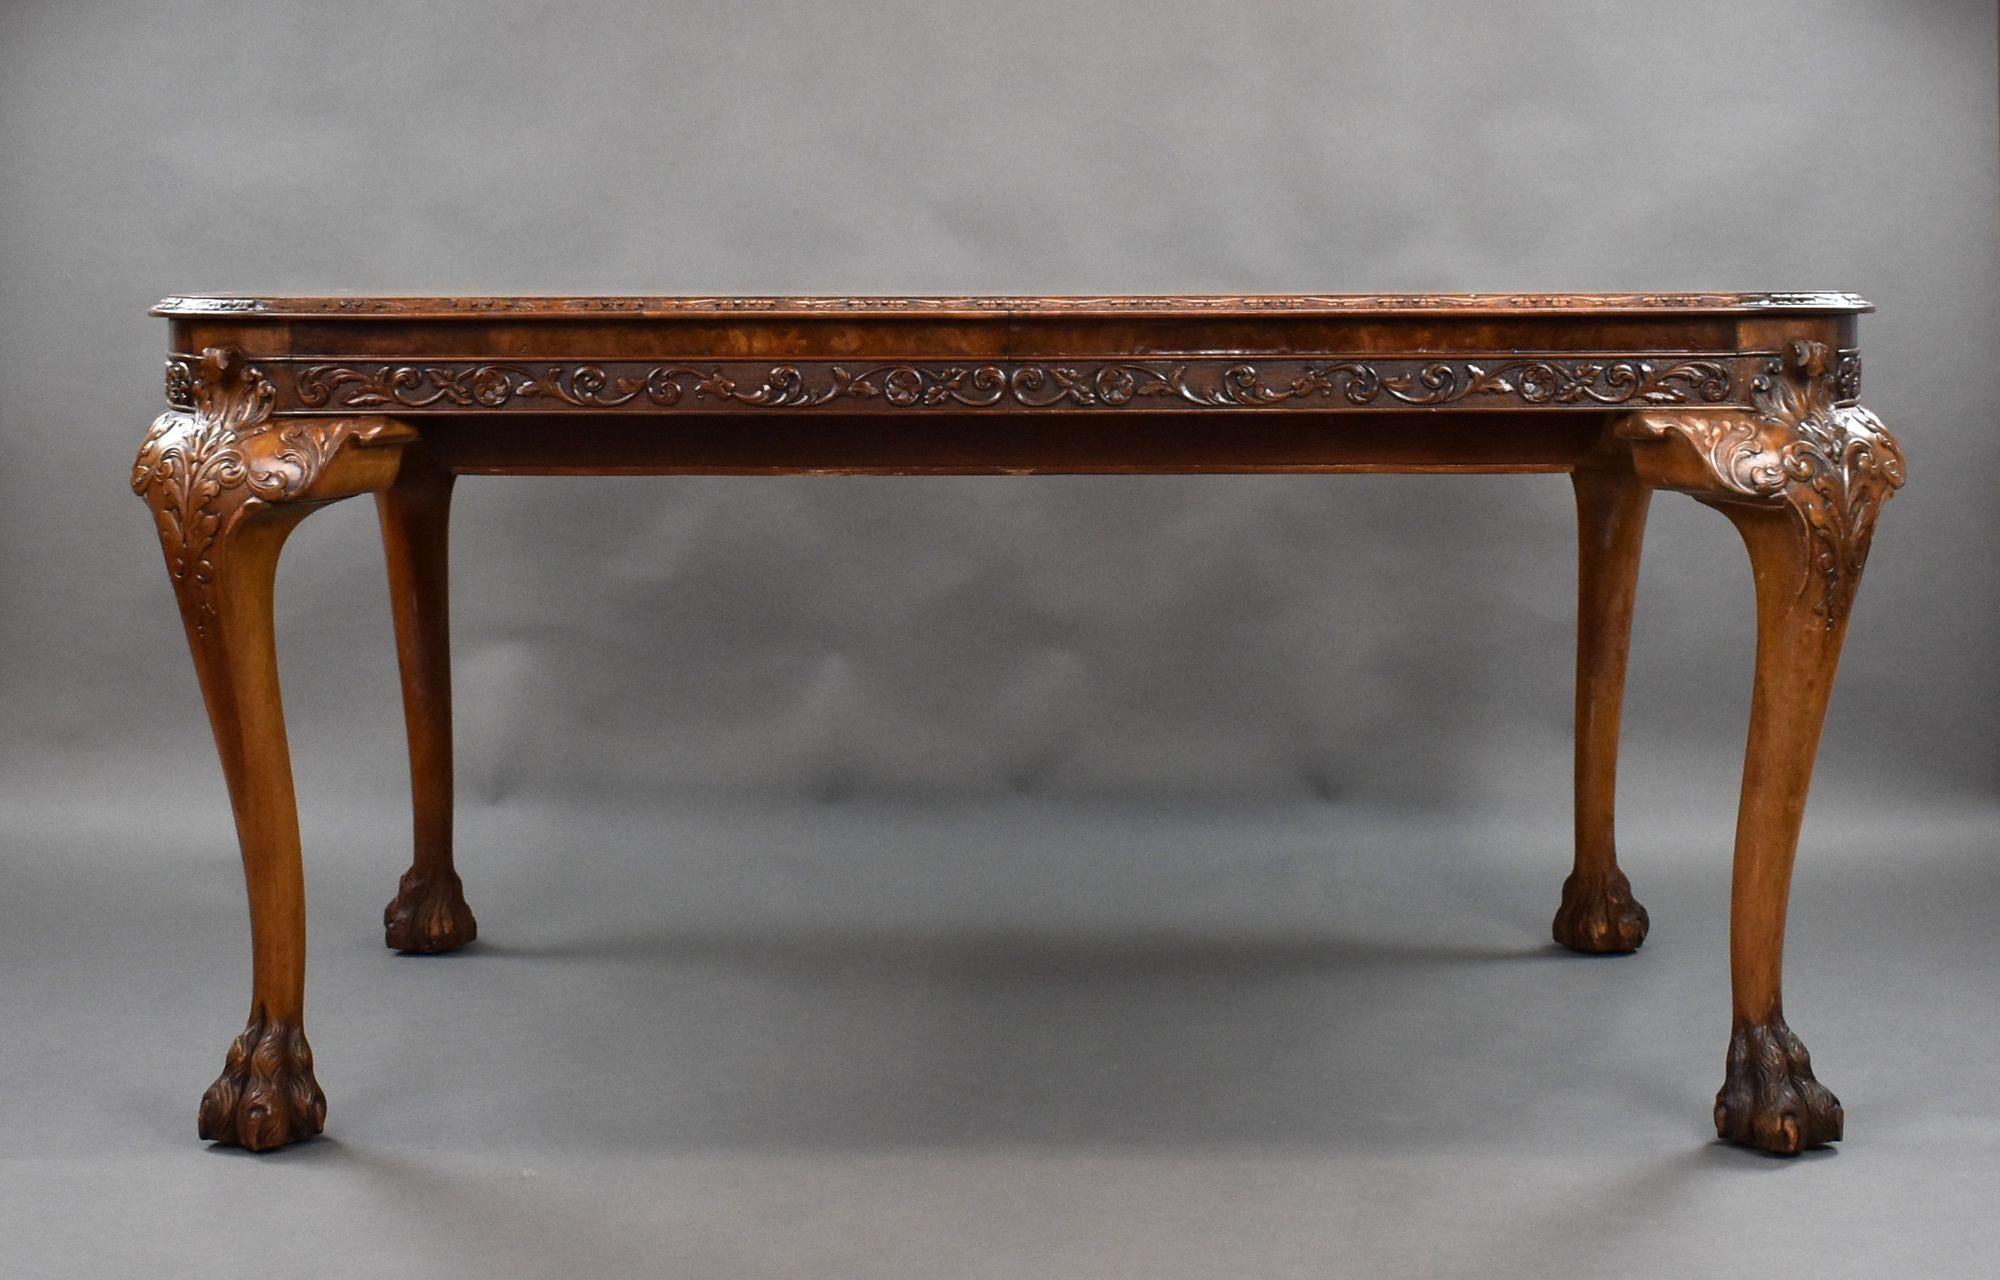 For sale is a good quality Queen Anne style burr walnut extending dining table, having a well figured top, with an additional leaf, standing on four elegant cabriole legs, each heavily carved terminating on paw feet. The leaf can be stored under the